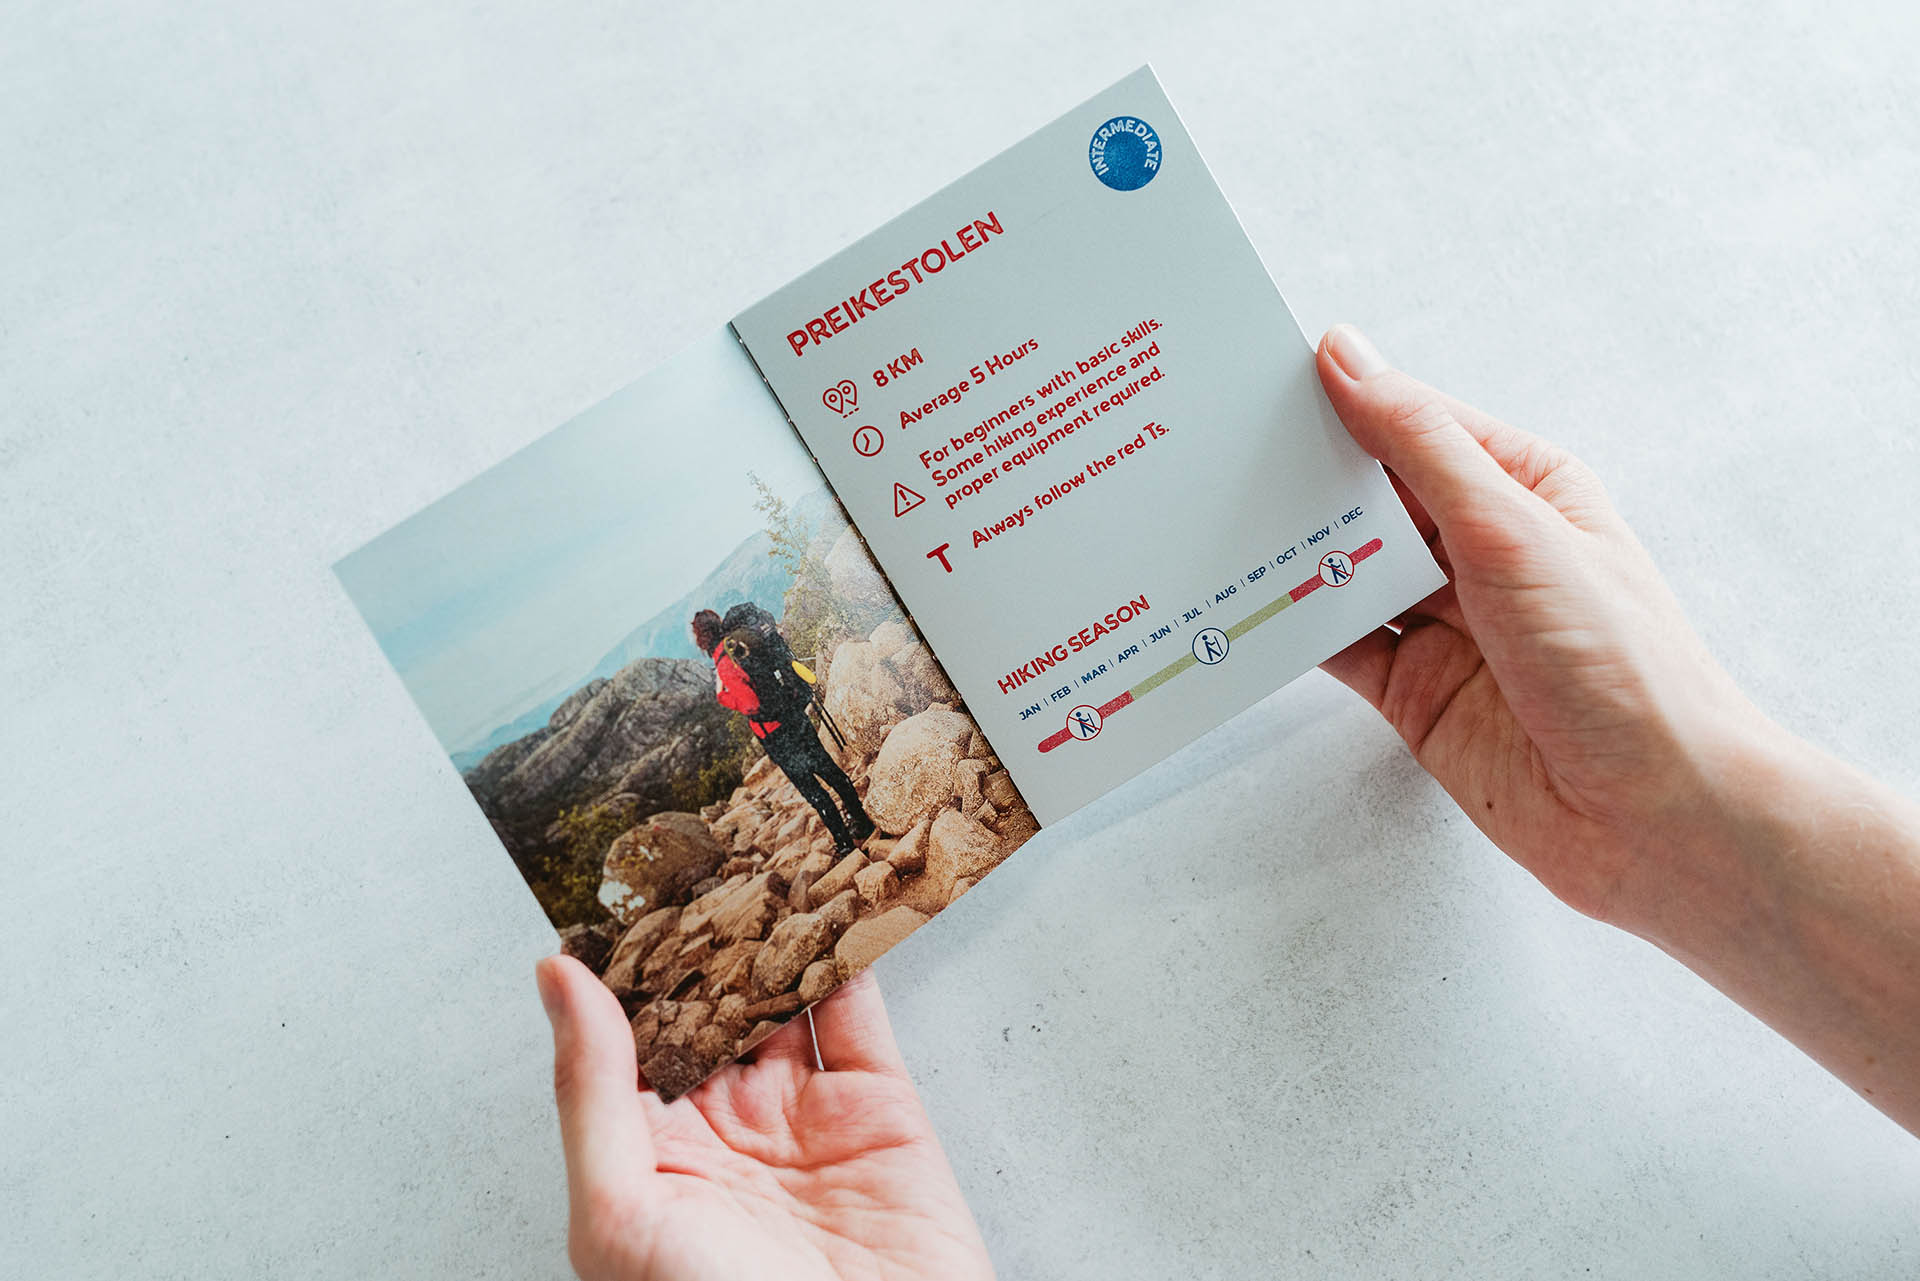 Page spread design featuring important information about the hike to Preikestolen